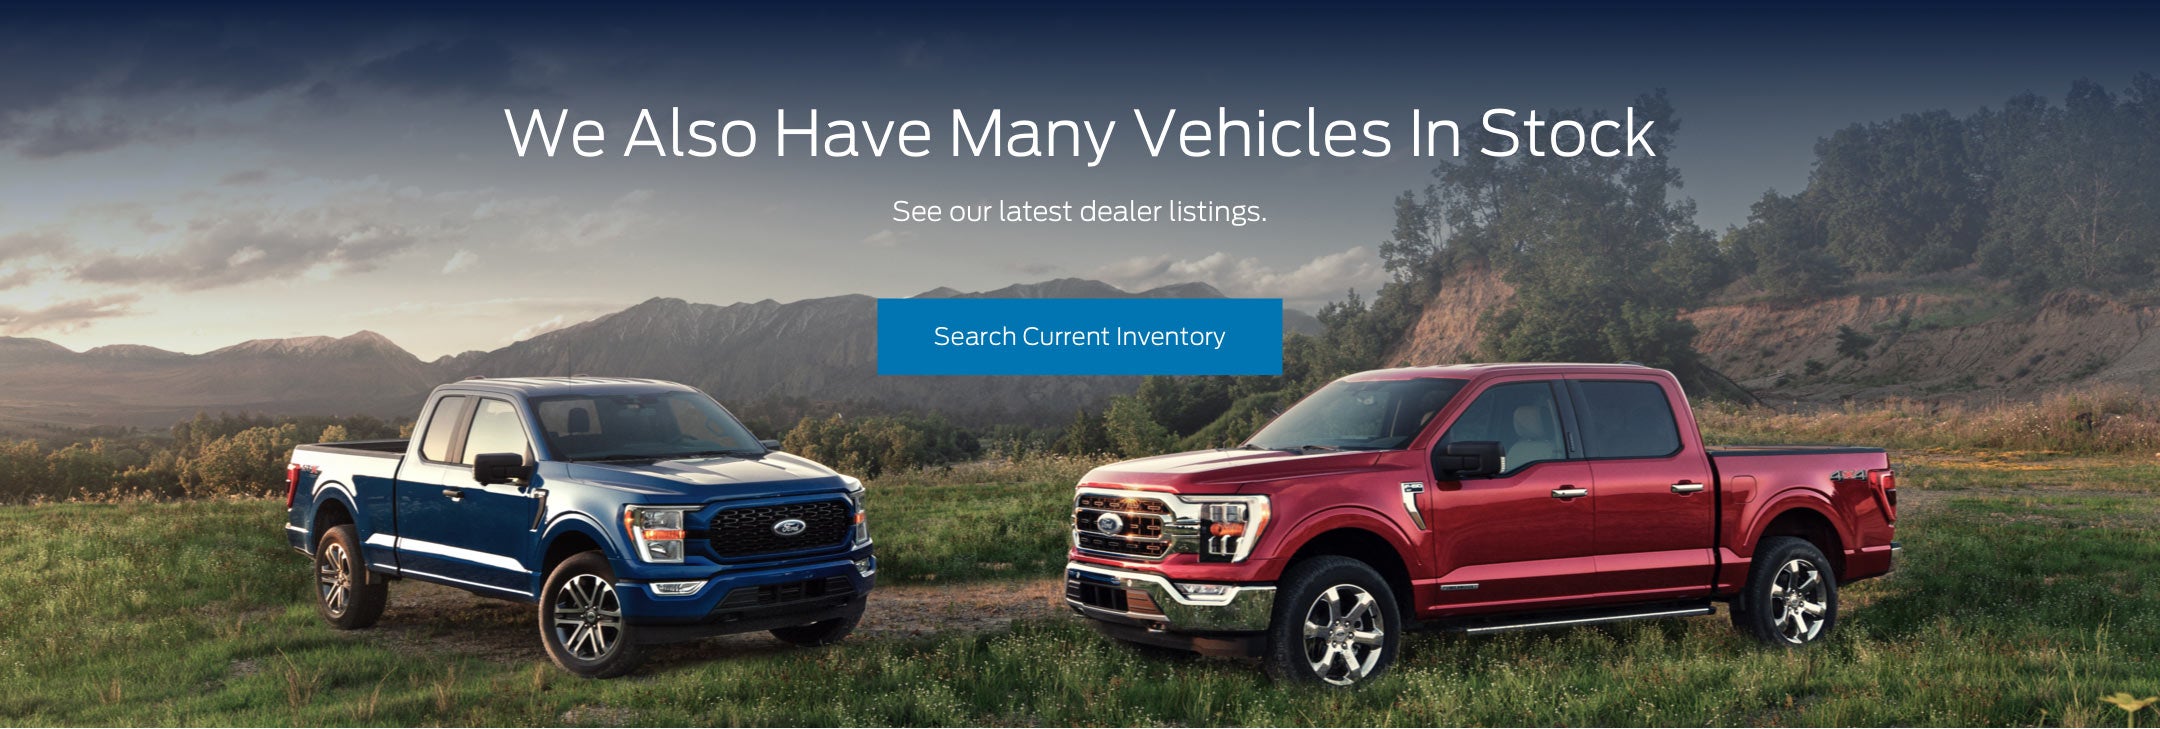 Ford vehicles in stock | Tunkhannock Ford in Tunkhannock PA